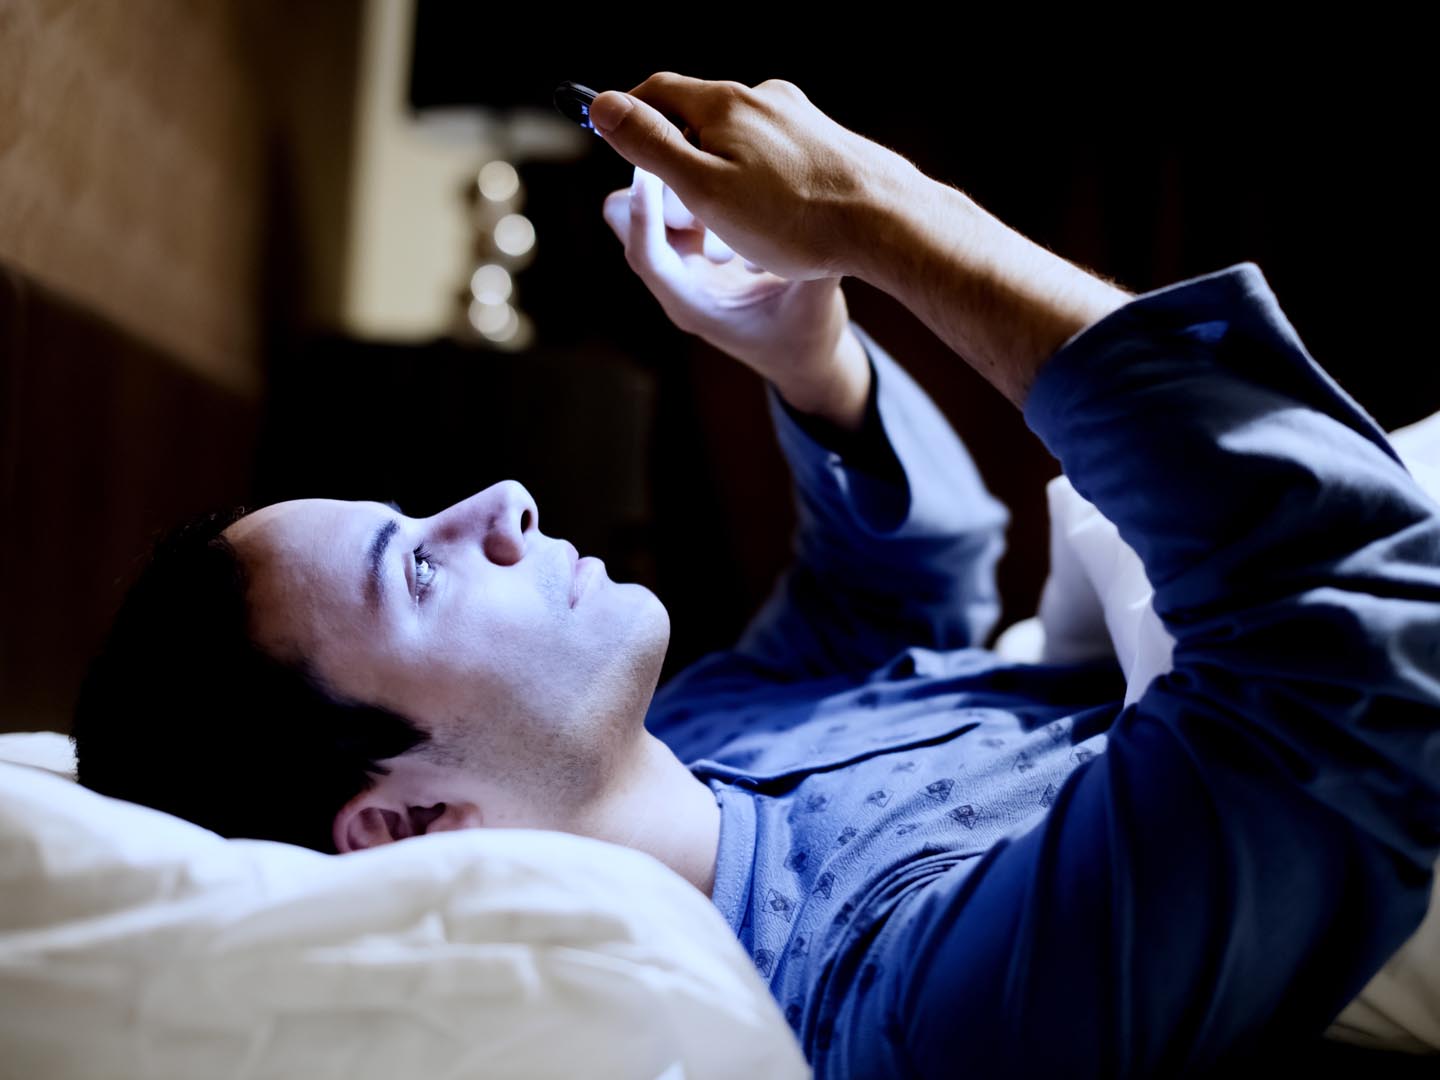 Man using his mobile phone in the bed